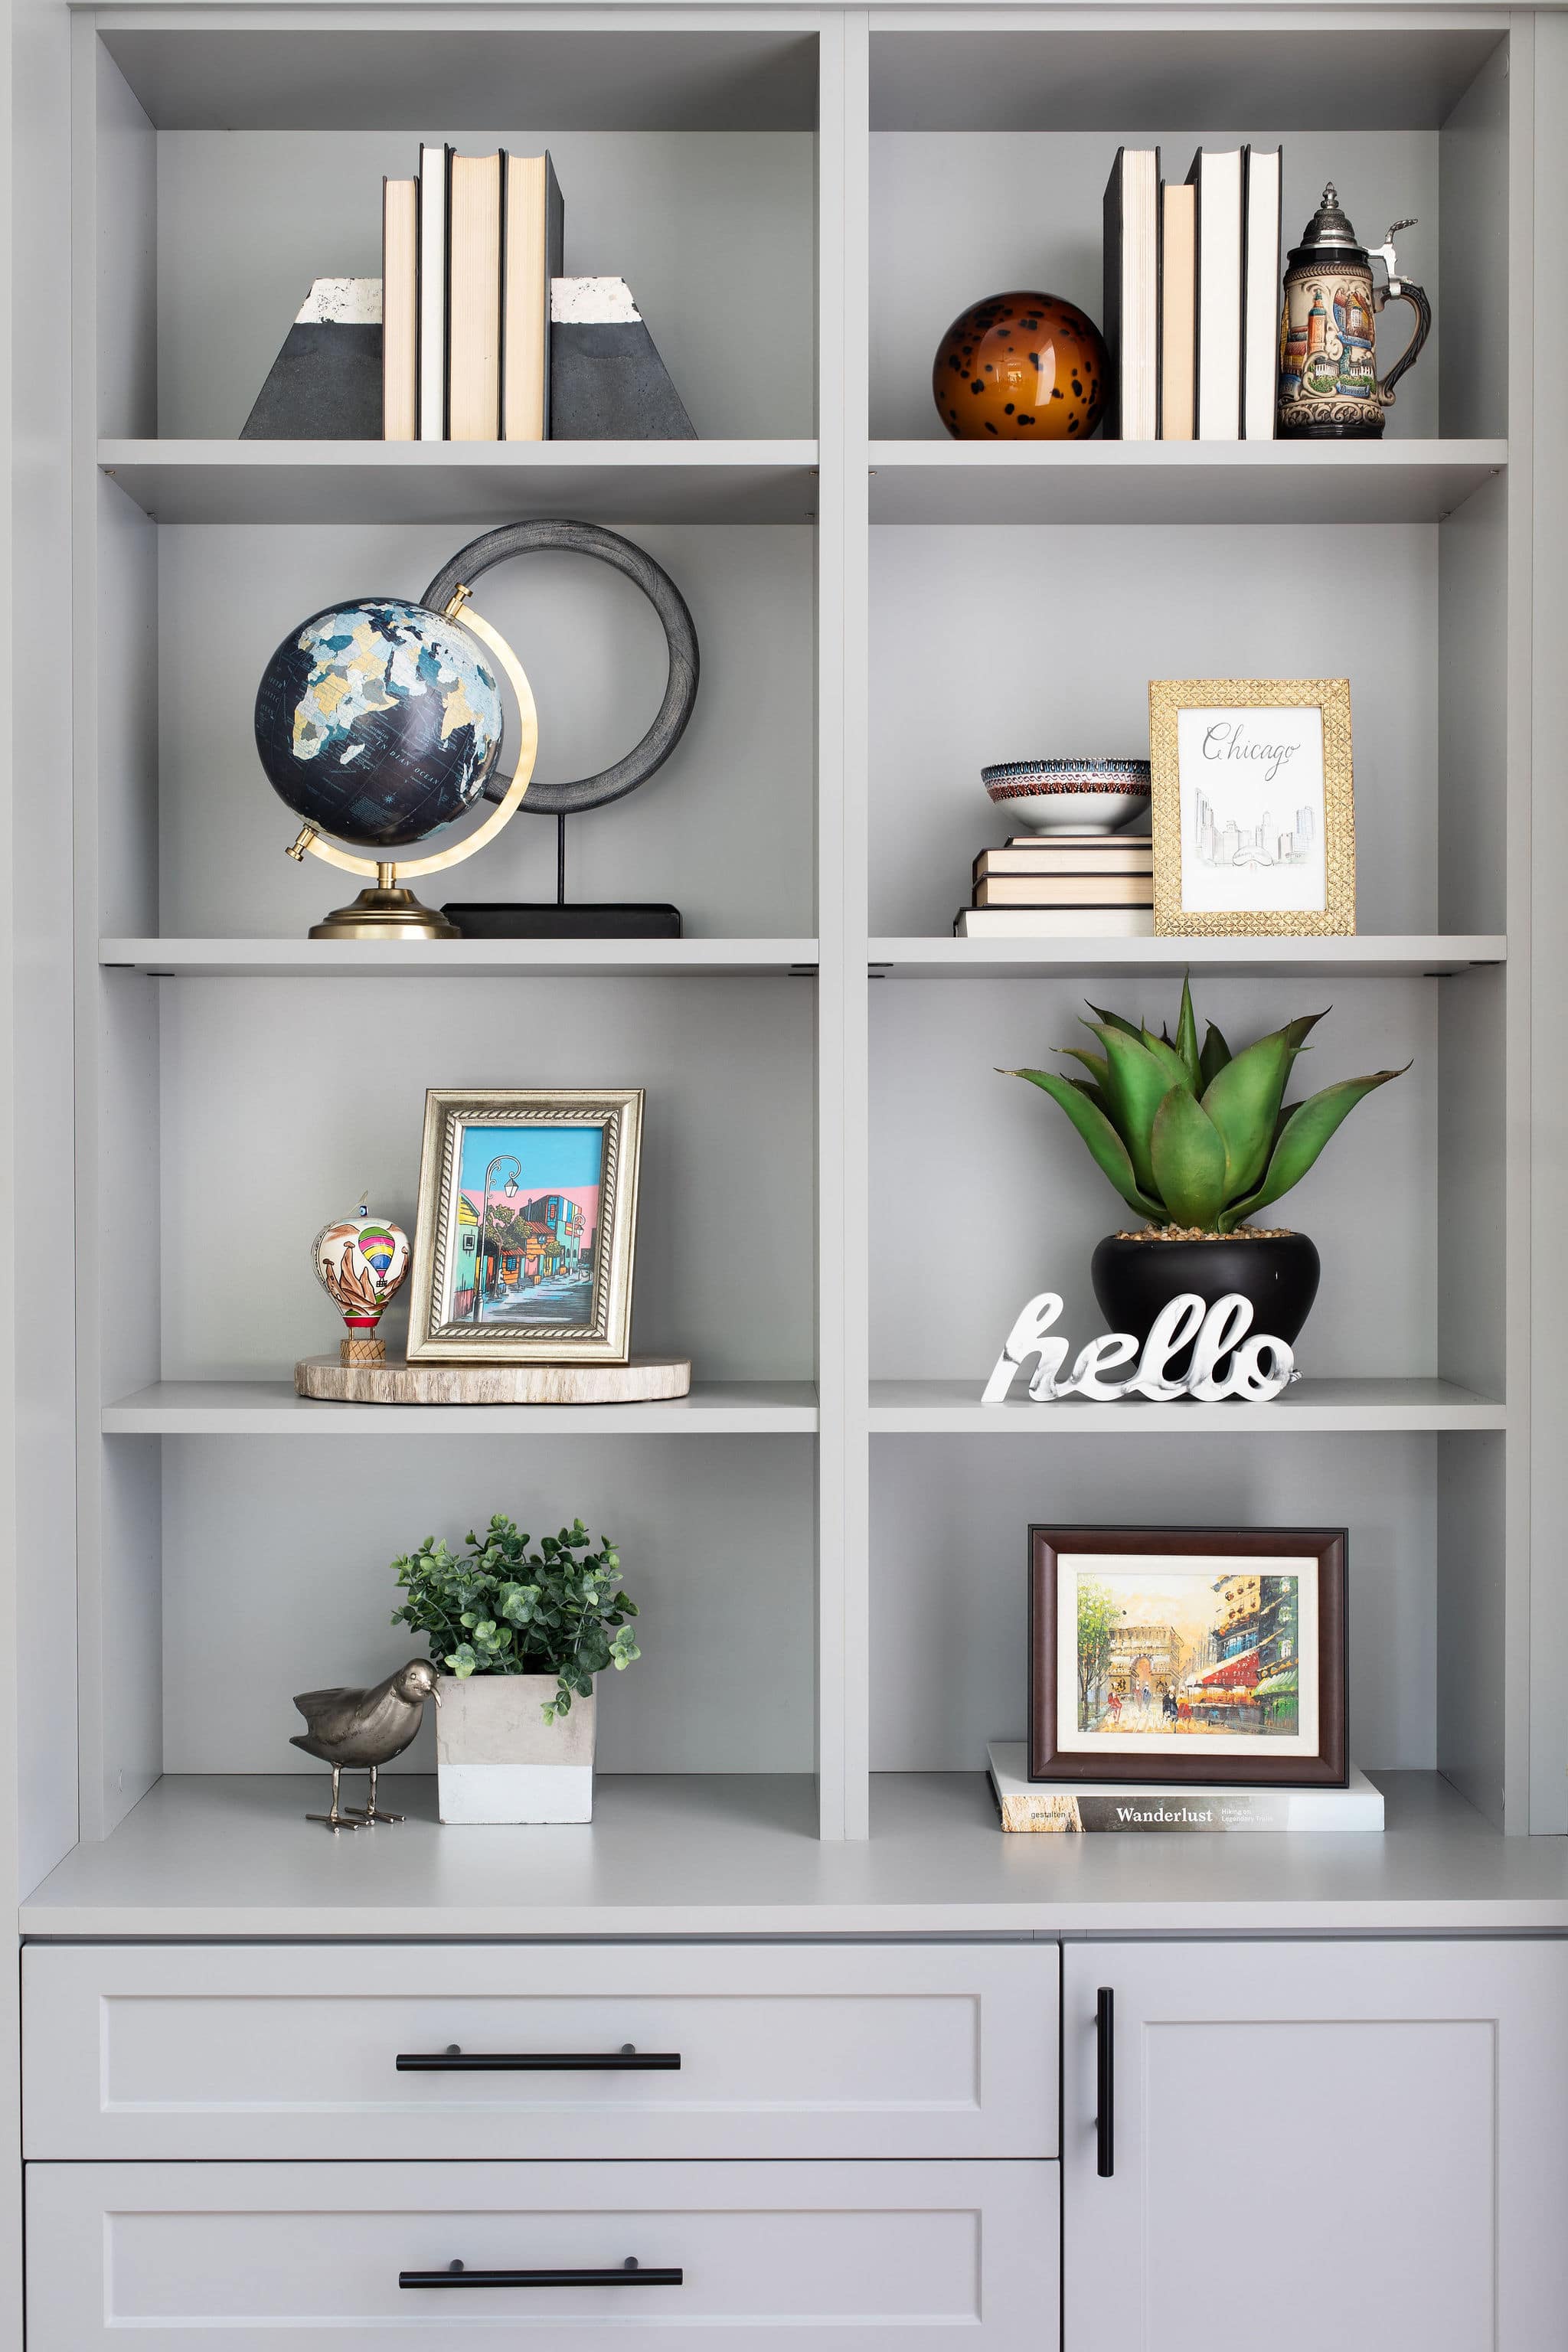 Decorative home office shelves housing a collection of curios, books and plants